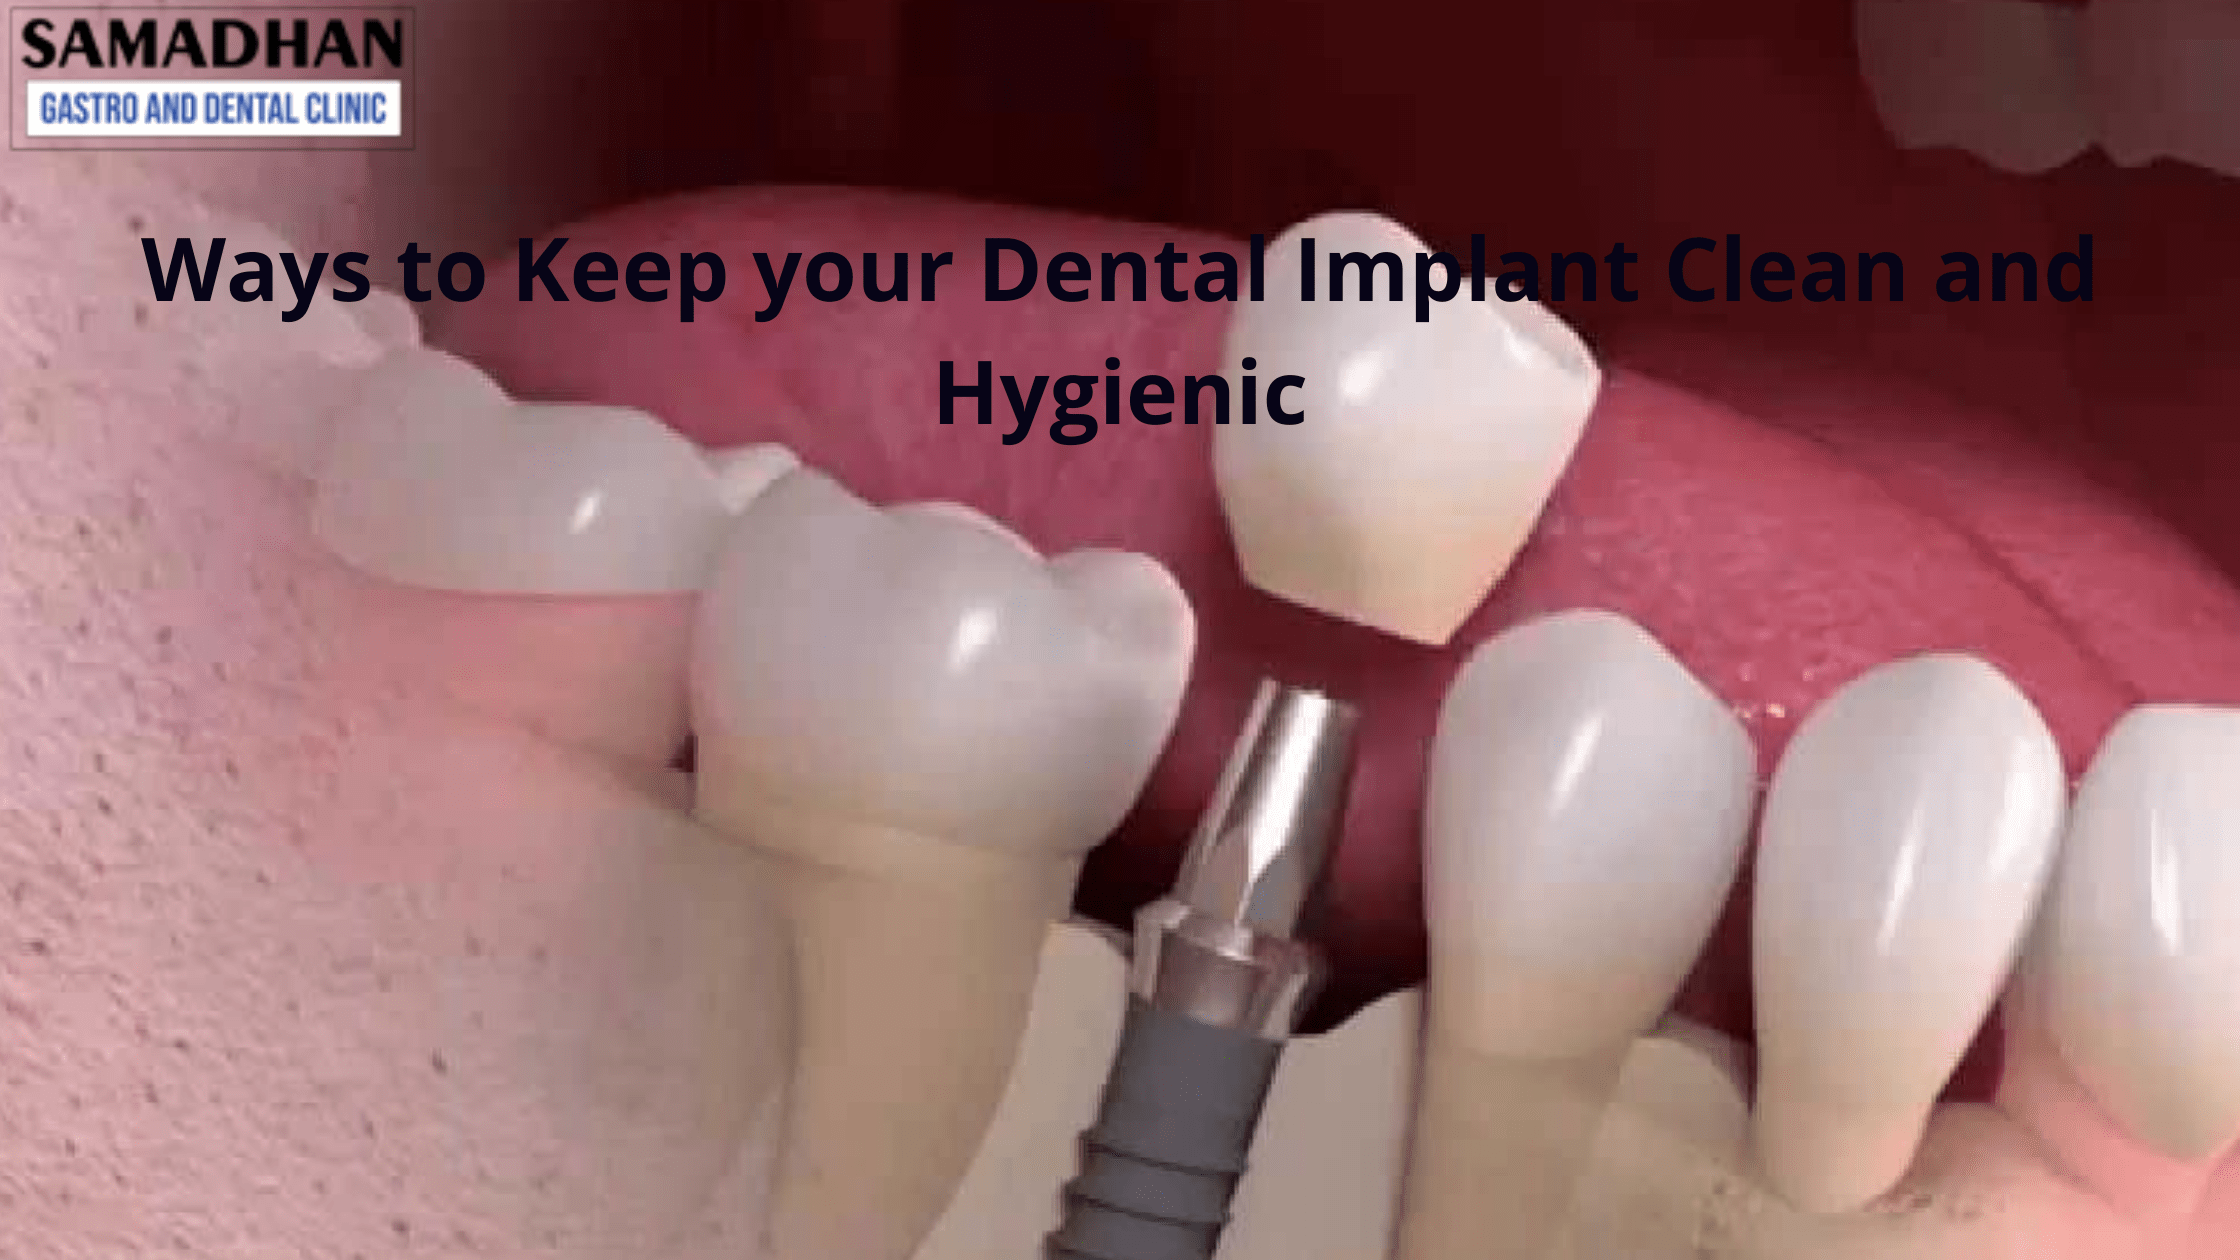 ways to keep your dental implant clean and hygienic
